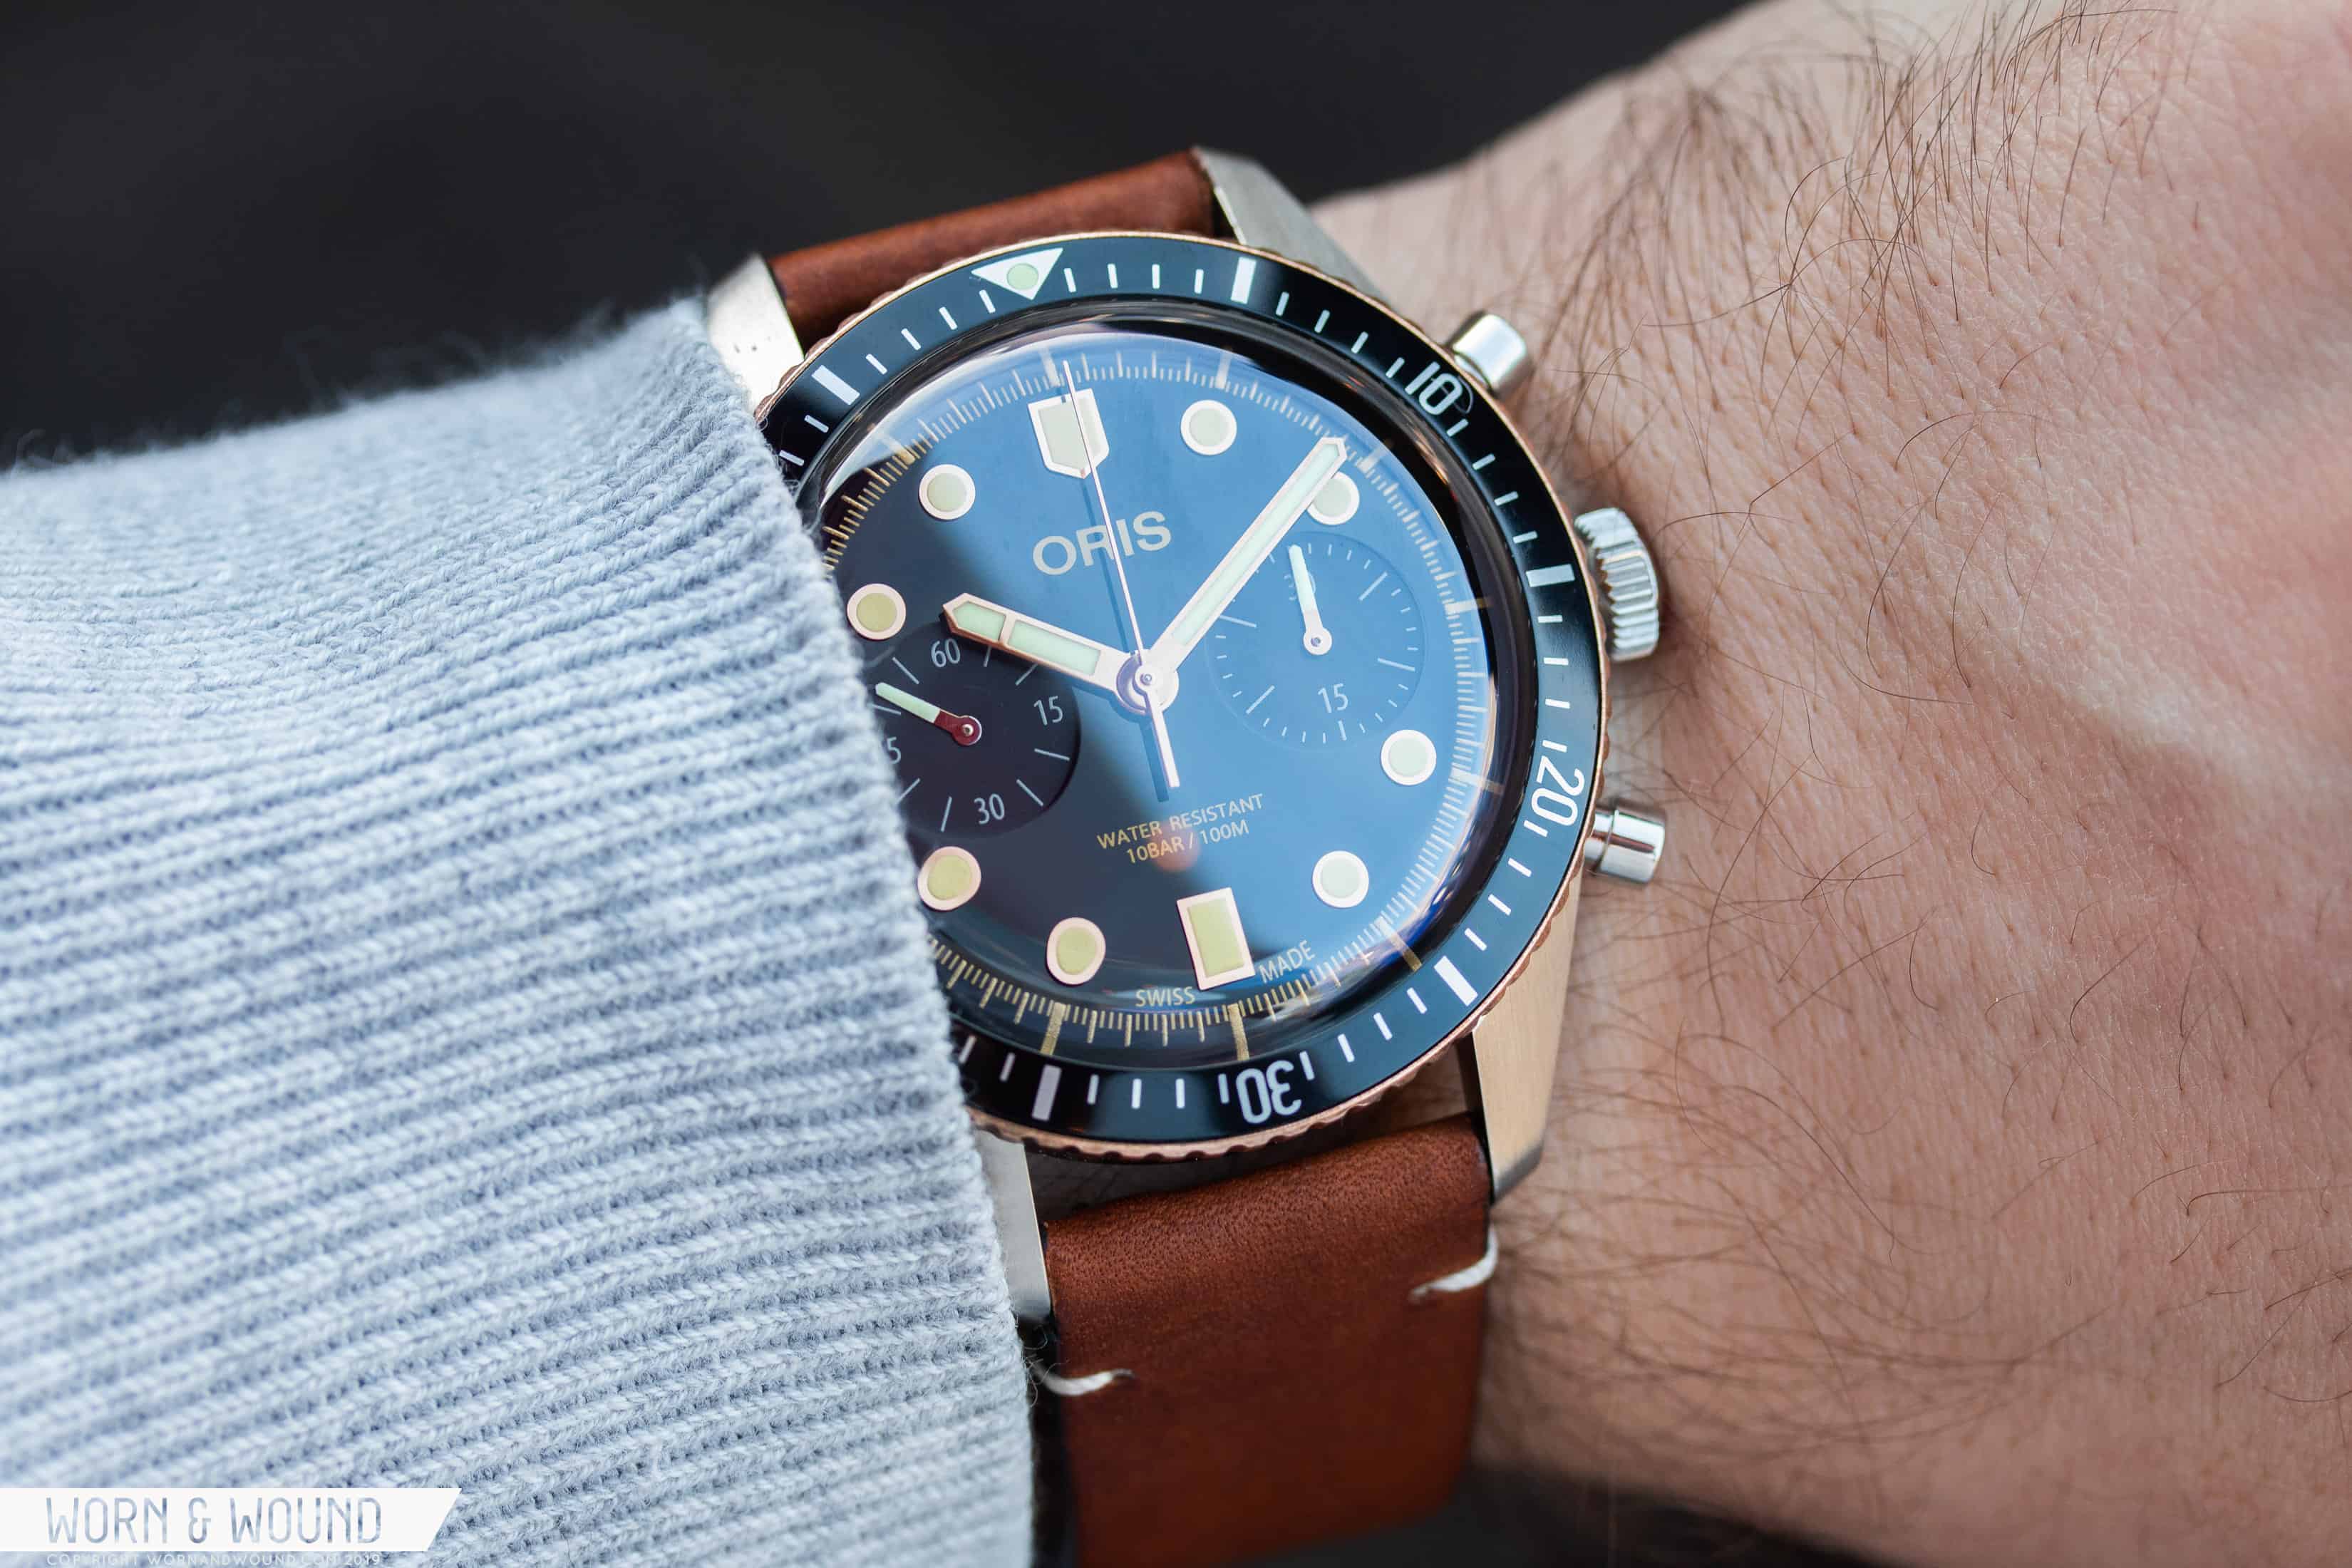 First Look at the Oris Divers Sixty-Five Chronograph